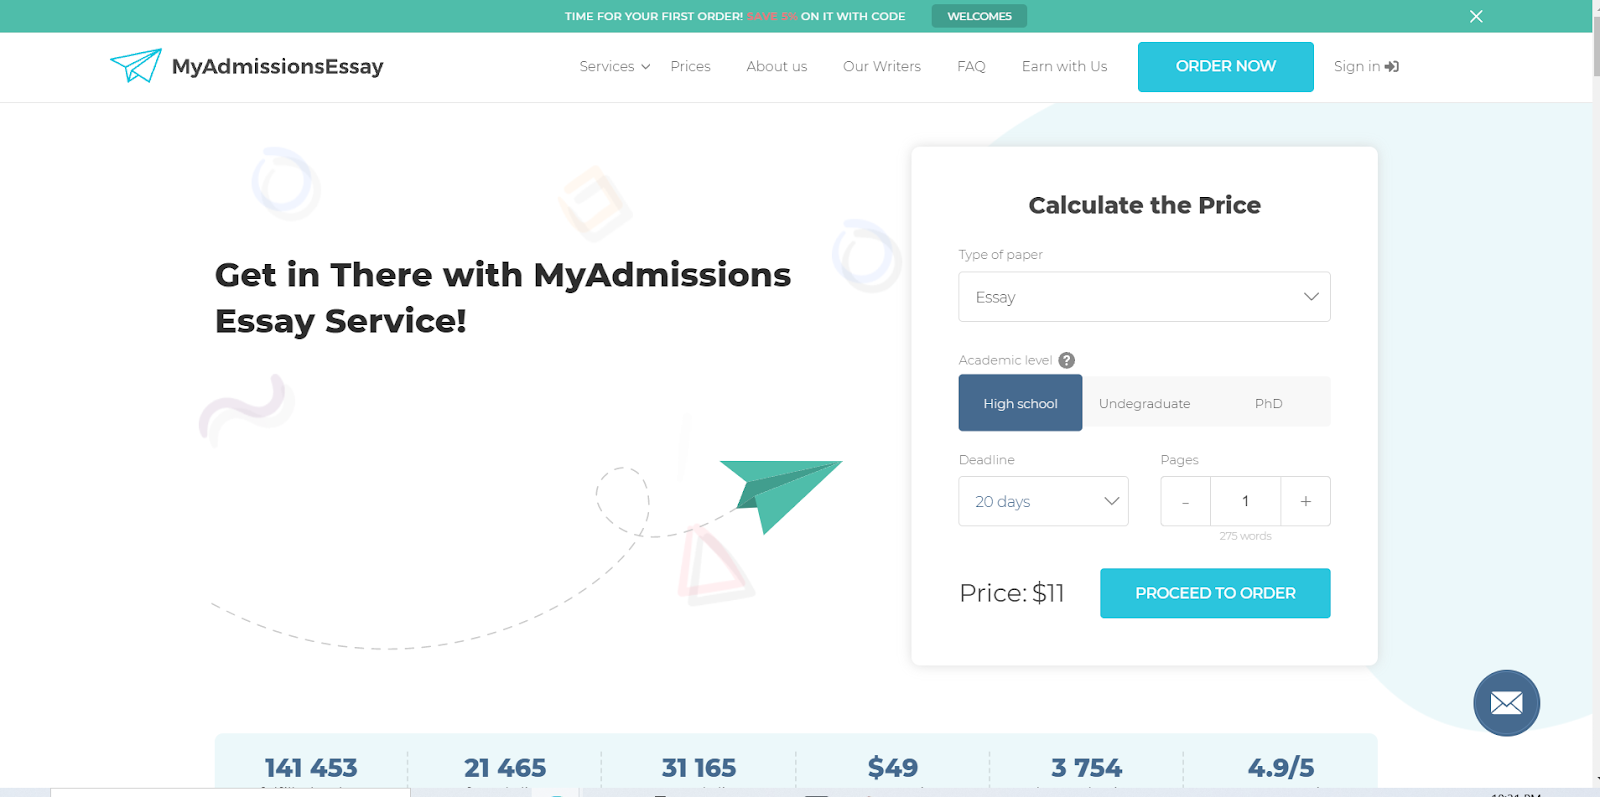 MyAdmissionEssay Homepage Image/Price Calculation